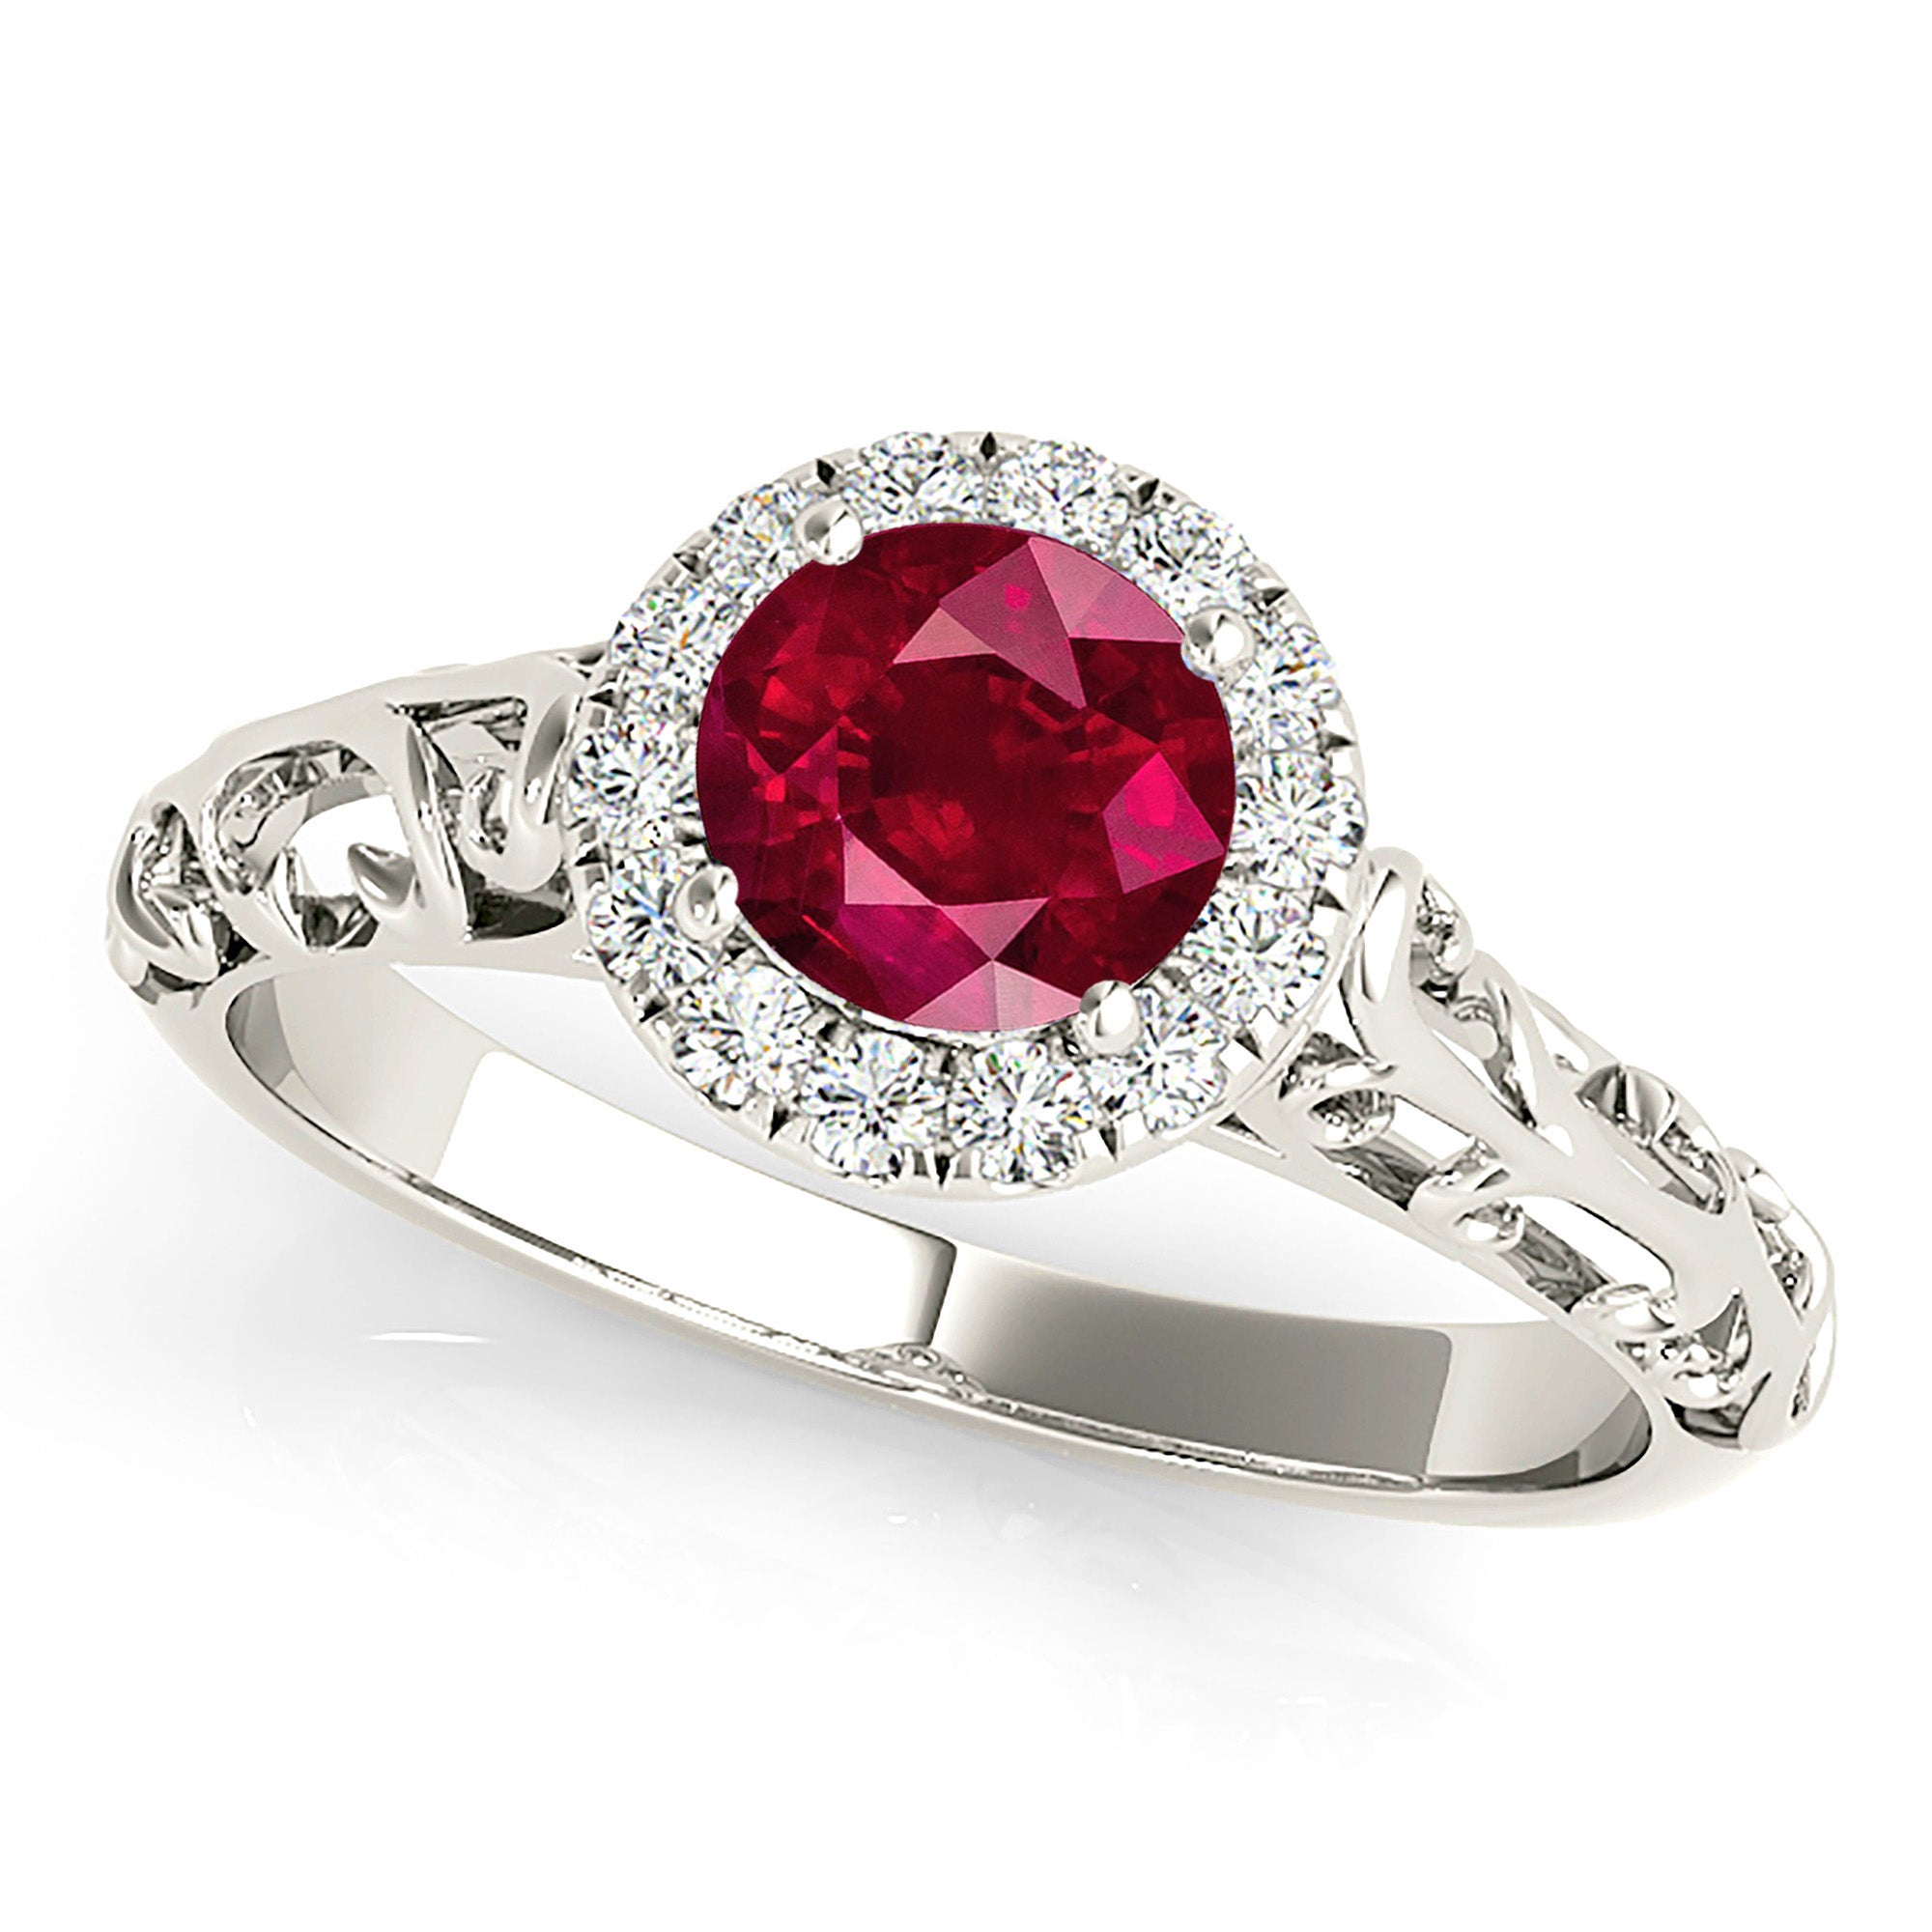 1.16 ct. Genuine Ruby Ring With 0.10 ctw. Diamond Halo , Hand Caved Filigree Fancy Band | Round Ruby Halo Ring | Natural Ruby Ring-in 14K/18K White, Yellow, Rose Gold and Platinum - Christmas Jewelry Gift -VIRABYANI